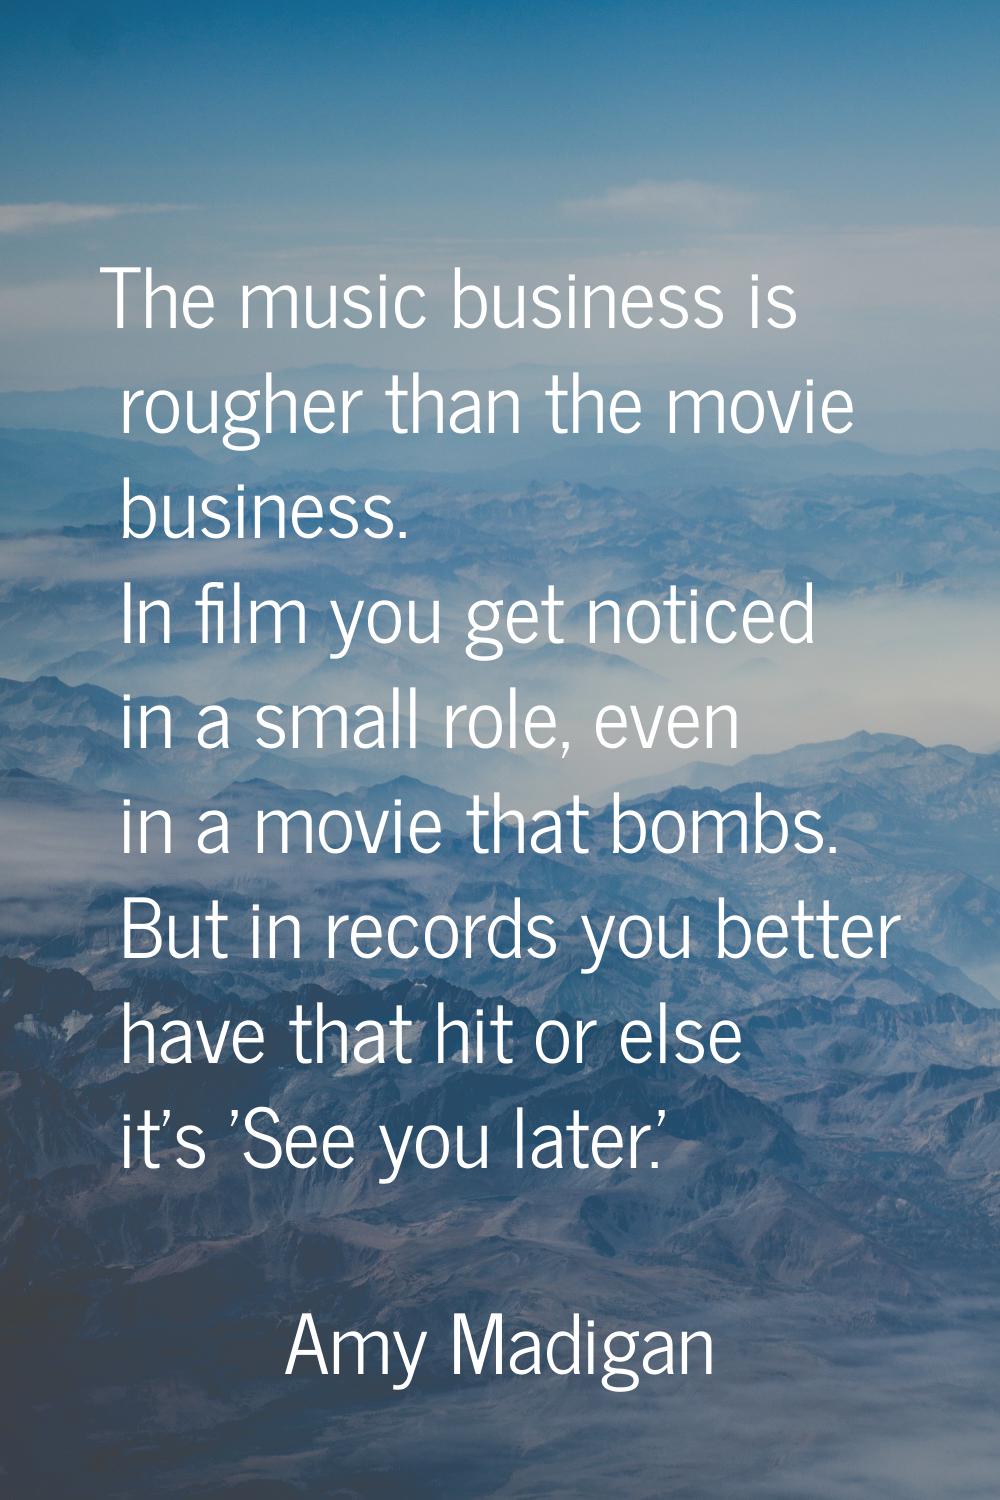 The music business is rougher than the movie business. In film you get noticed in a small role, eve